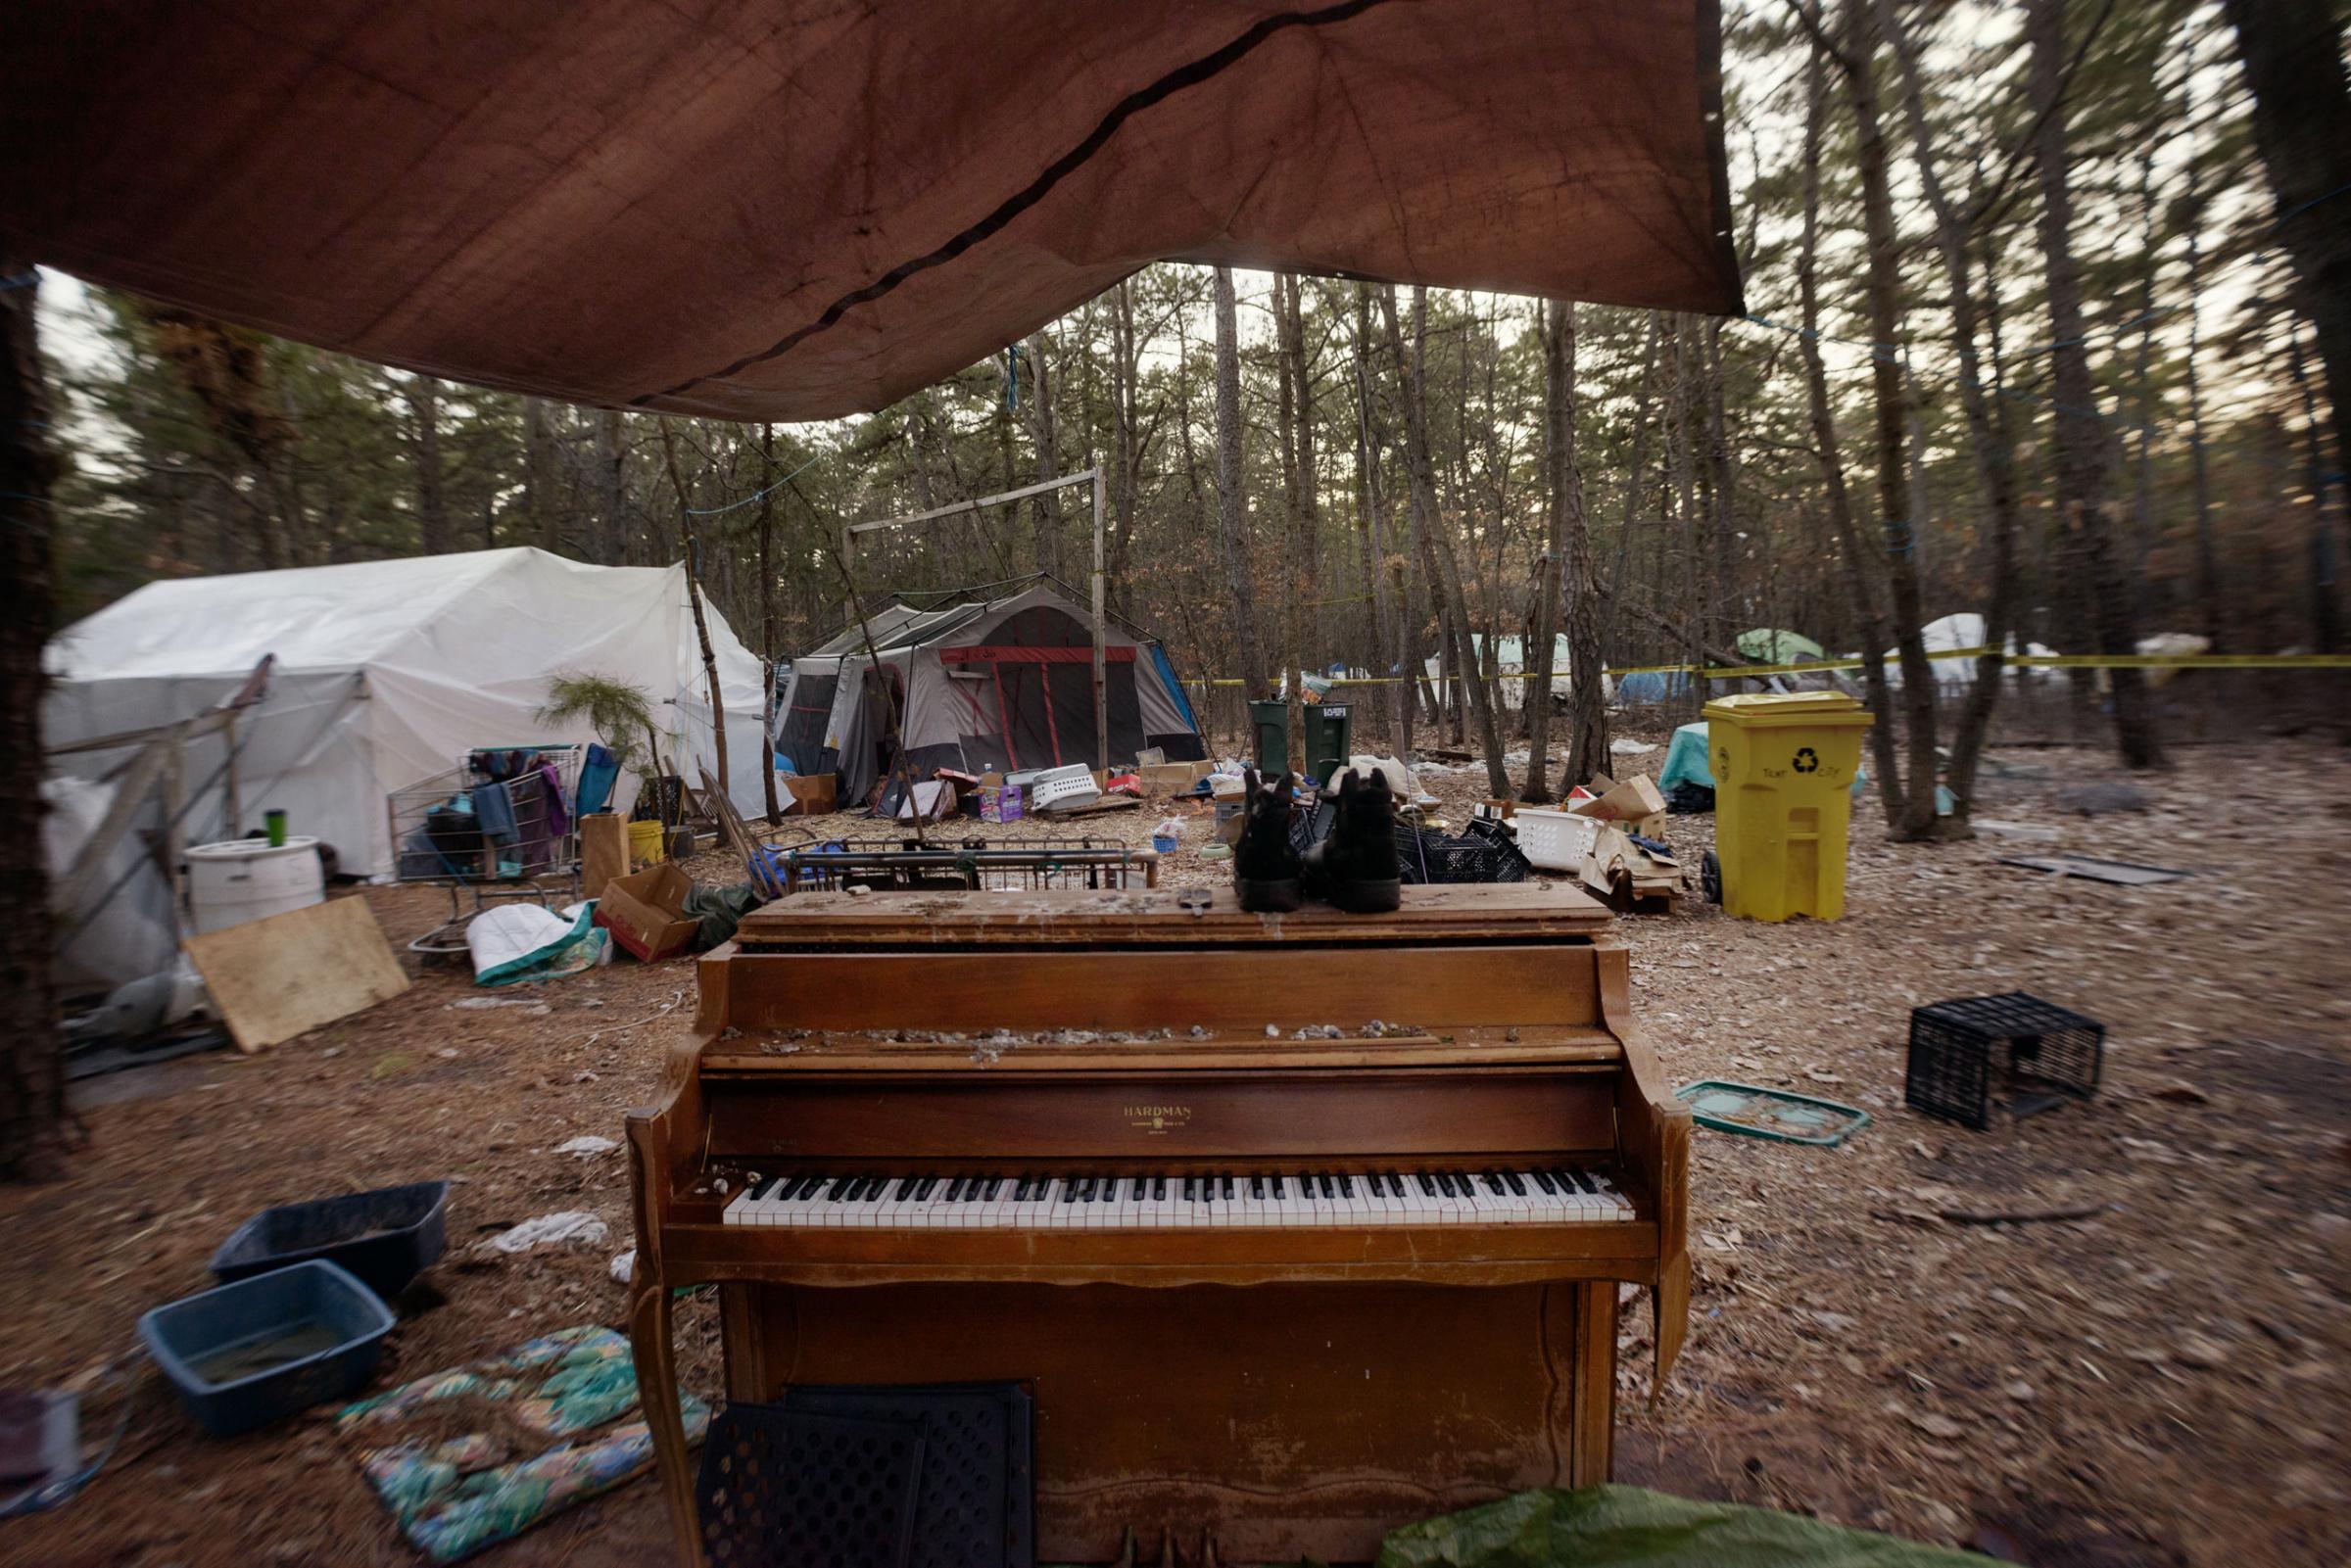 20  March  2014 - Tent City, Lakewood, New Jersey - A piano in a makeshift courtyard.